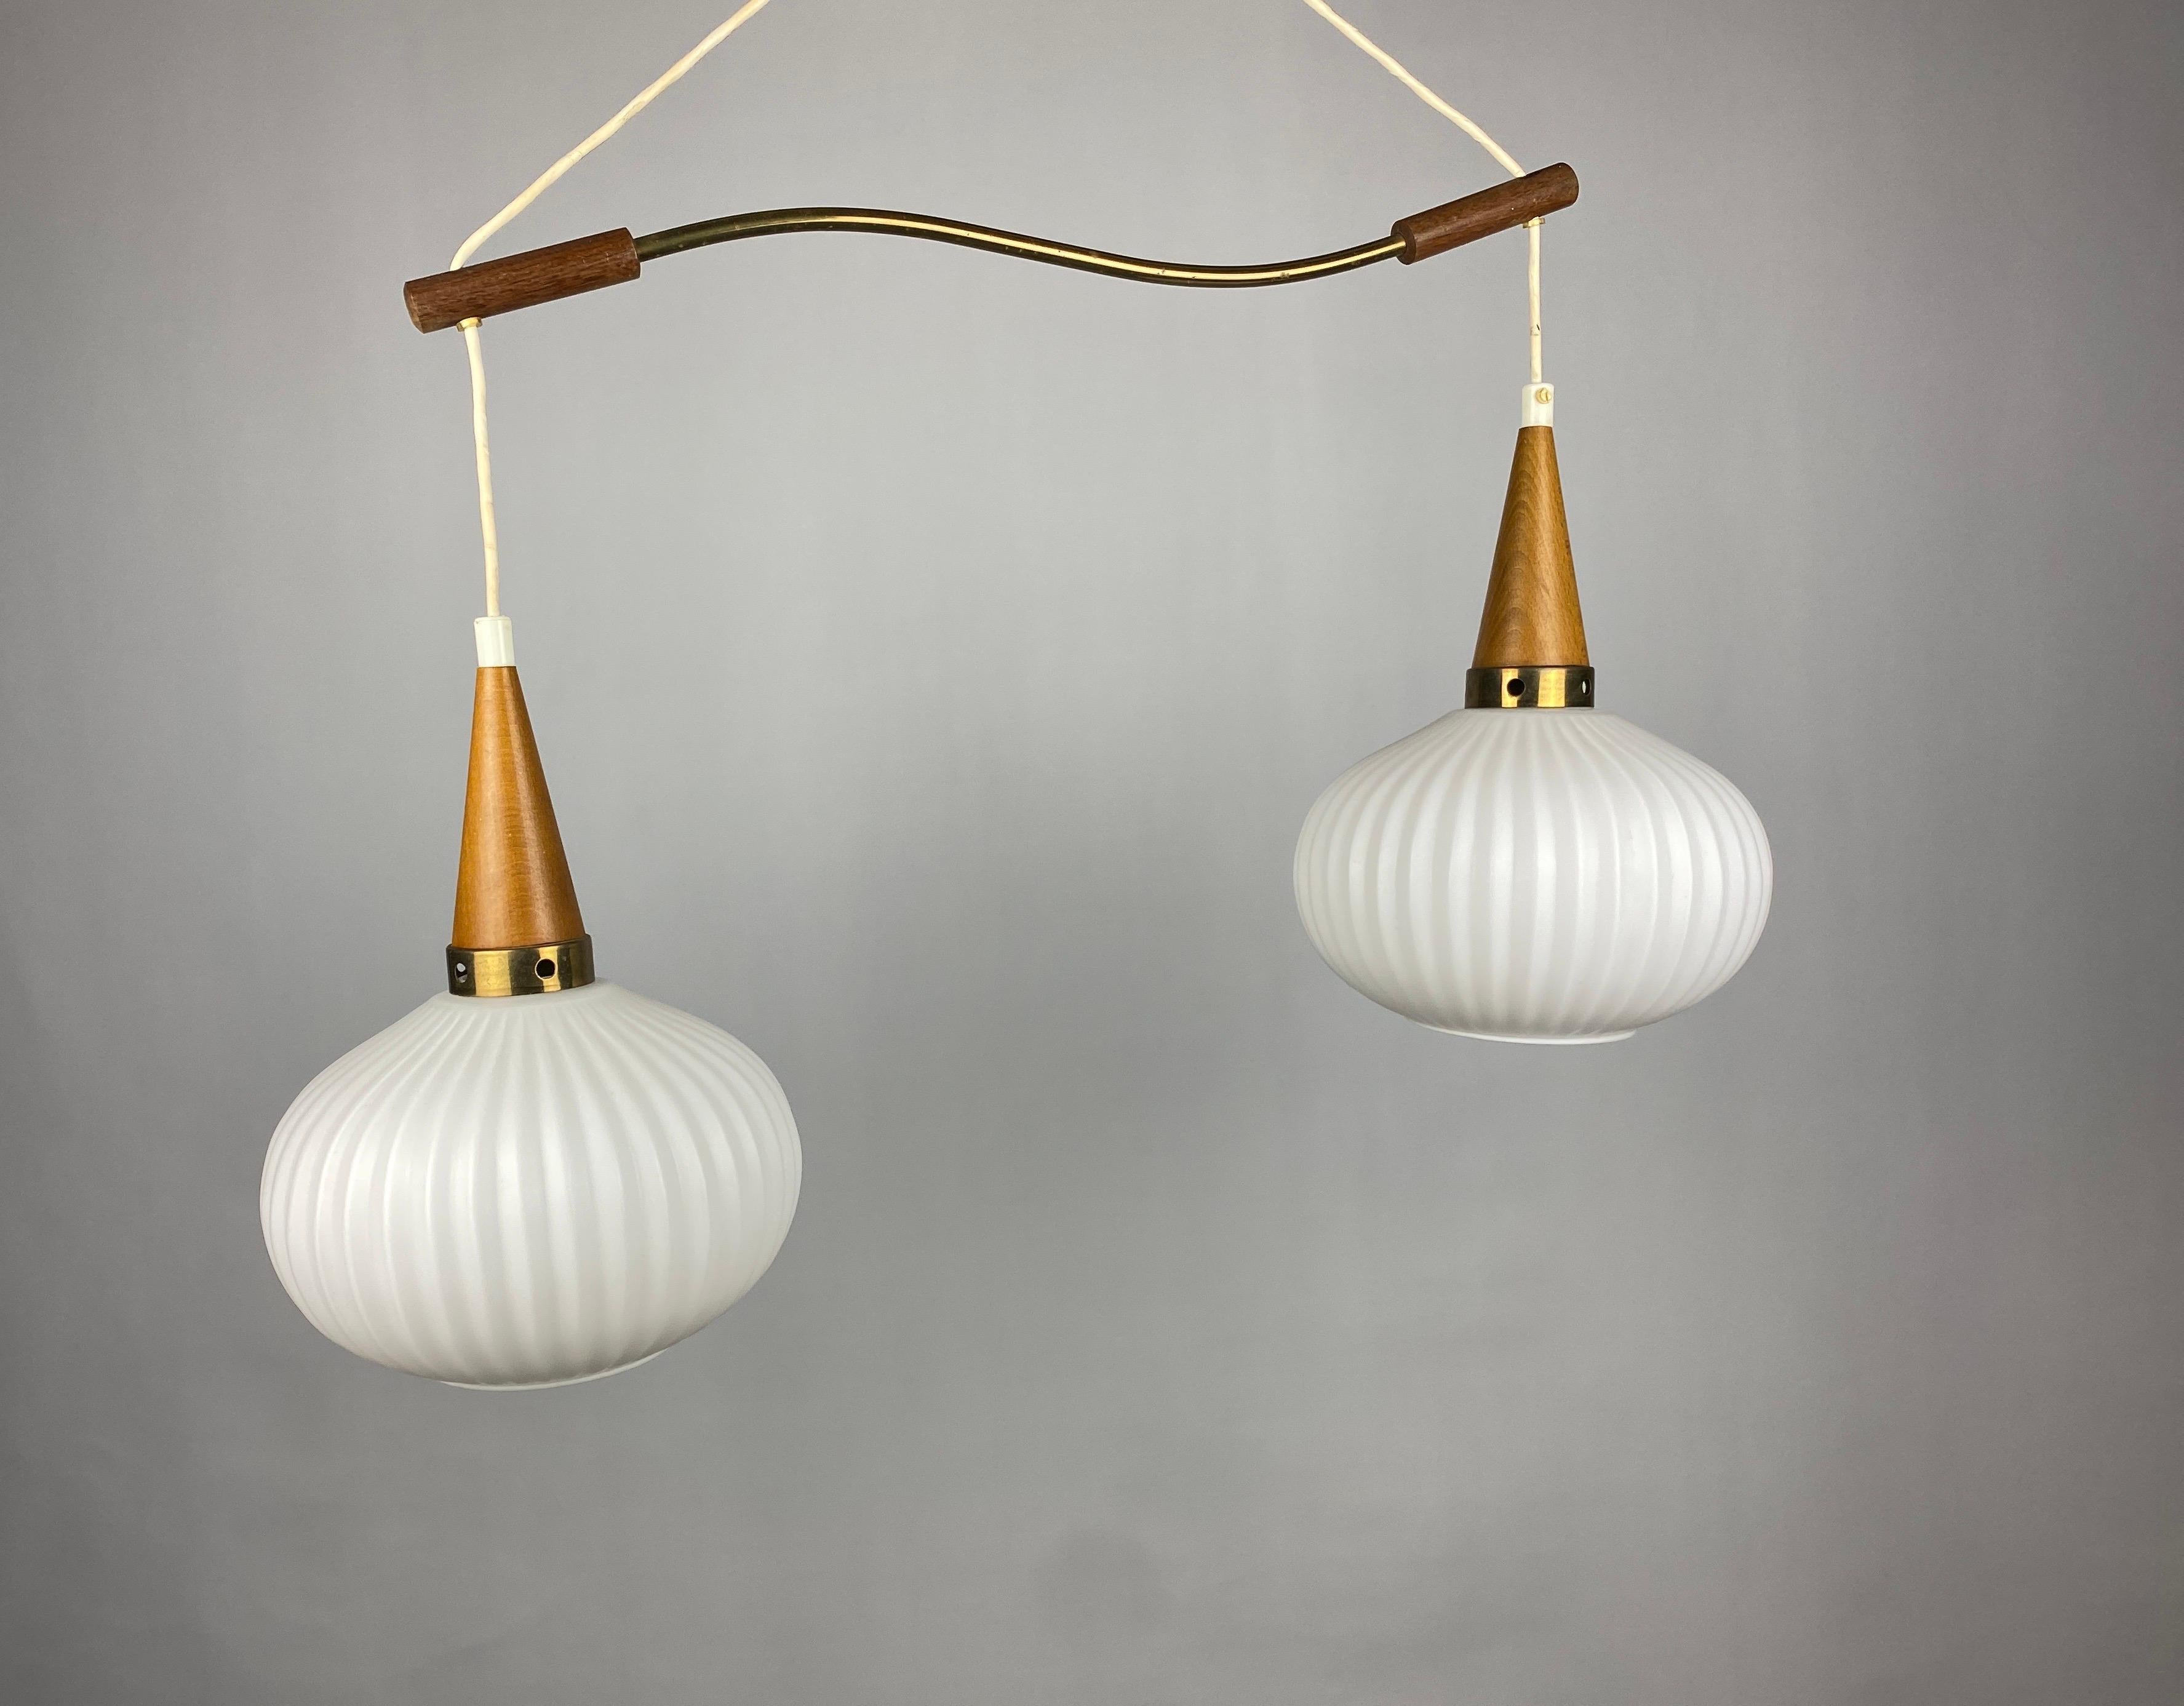 White opal frosted and ribbed pumpkin style oval glass pendant lights. Brass plated metal ring and accent. The two pendant lamps are held by a brass and wooden rod through which the cables run to the wooden ceiling cap.

Manufactured by Massive,